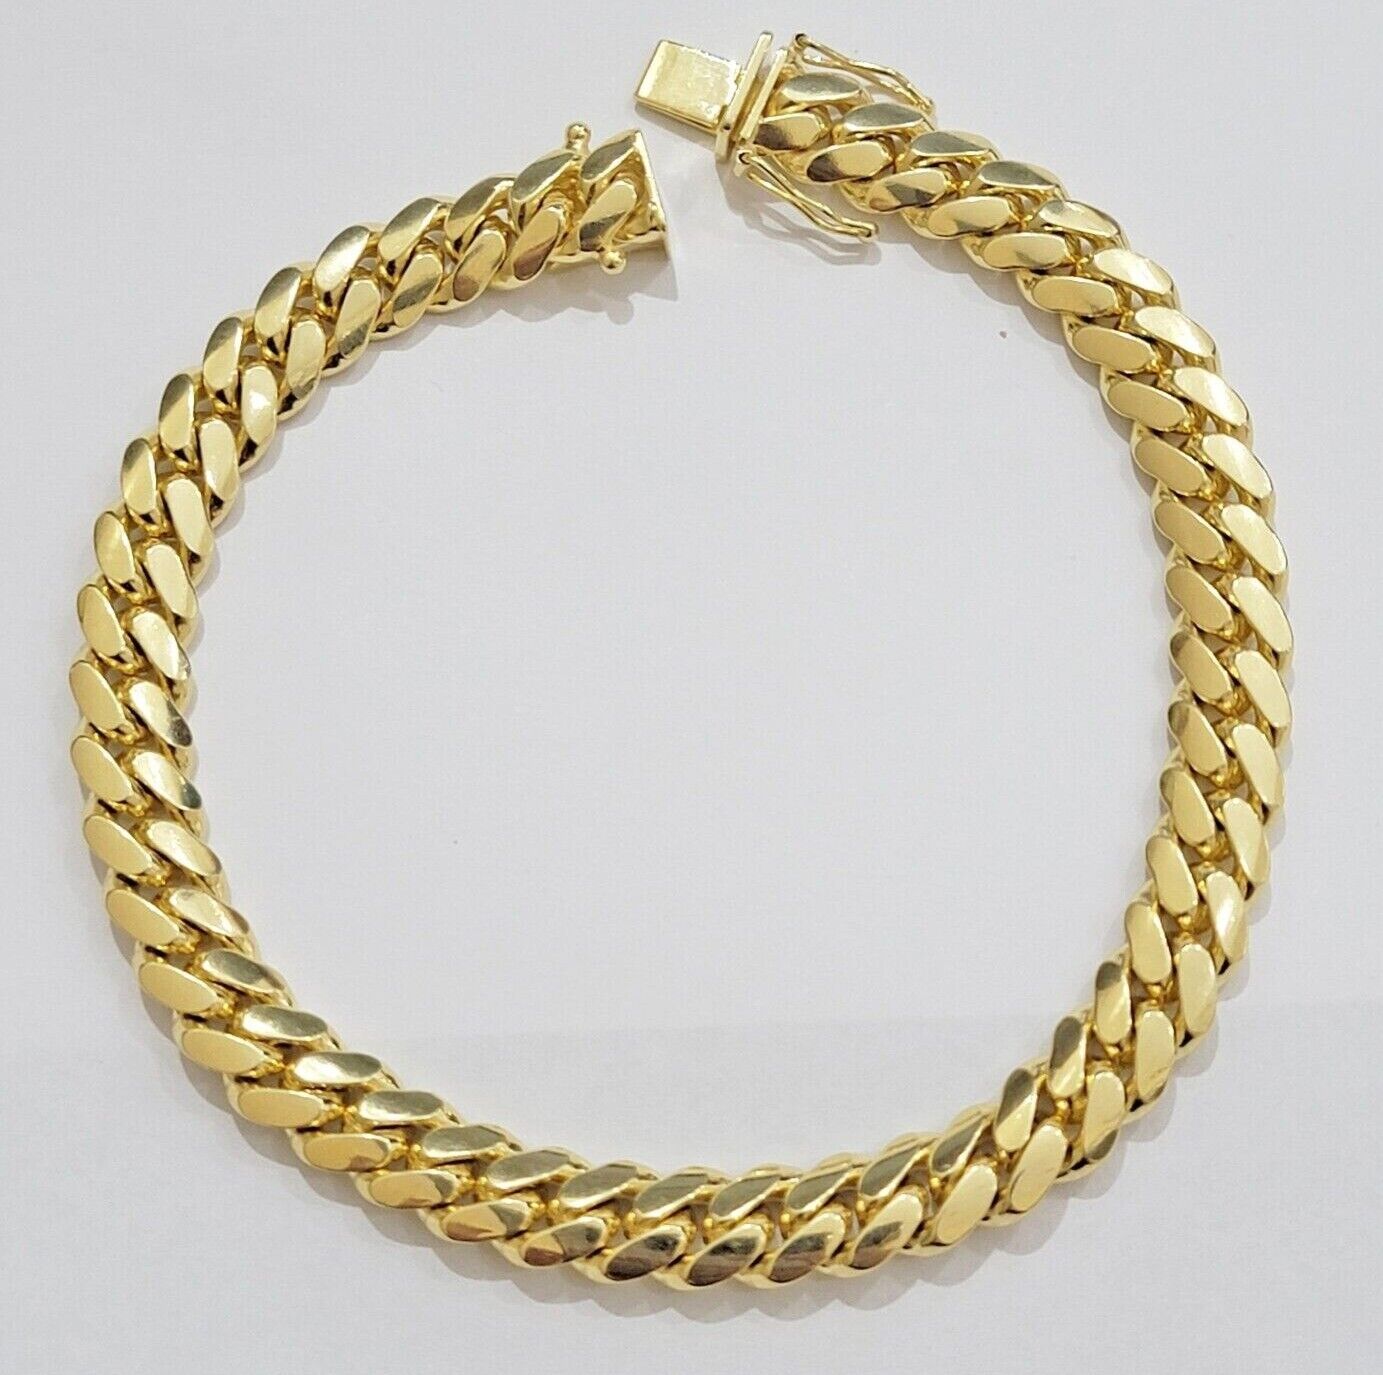 Solid 10k Gold Bracelet 8mm Miami Cuban Link 9" Inch Box Clasp SOLID LINKS, Mens